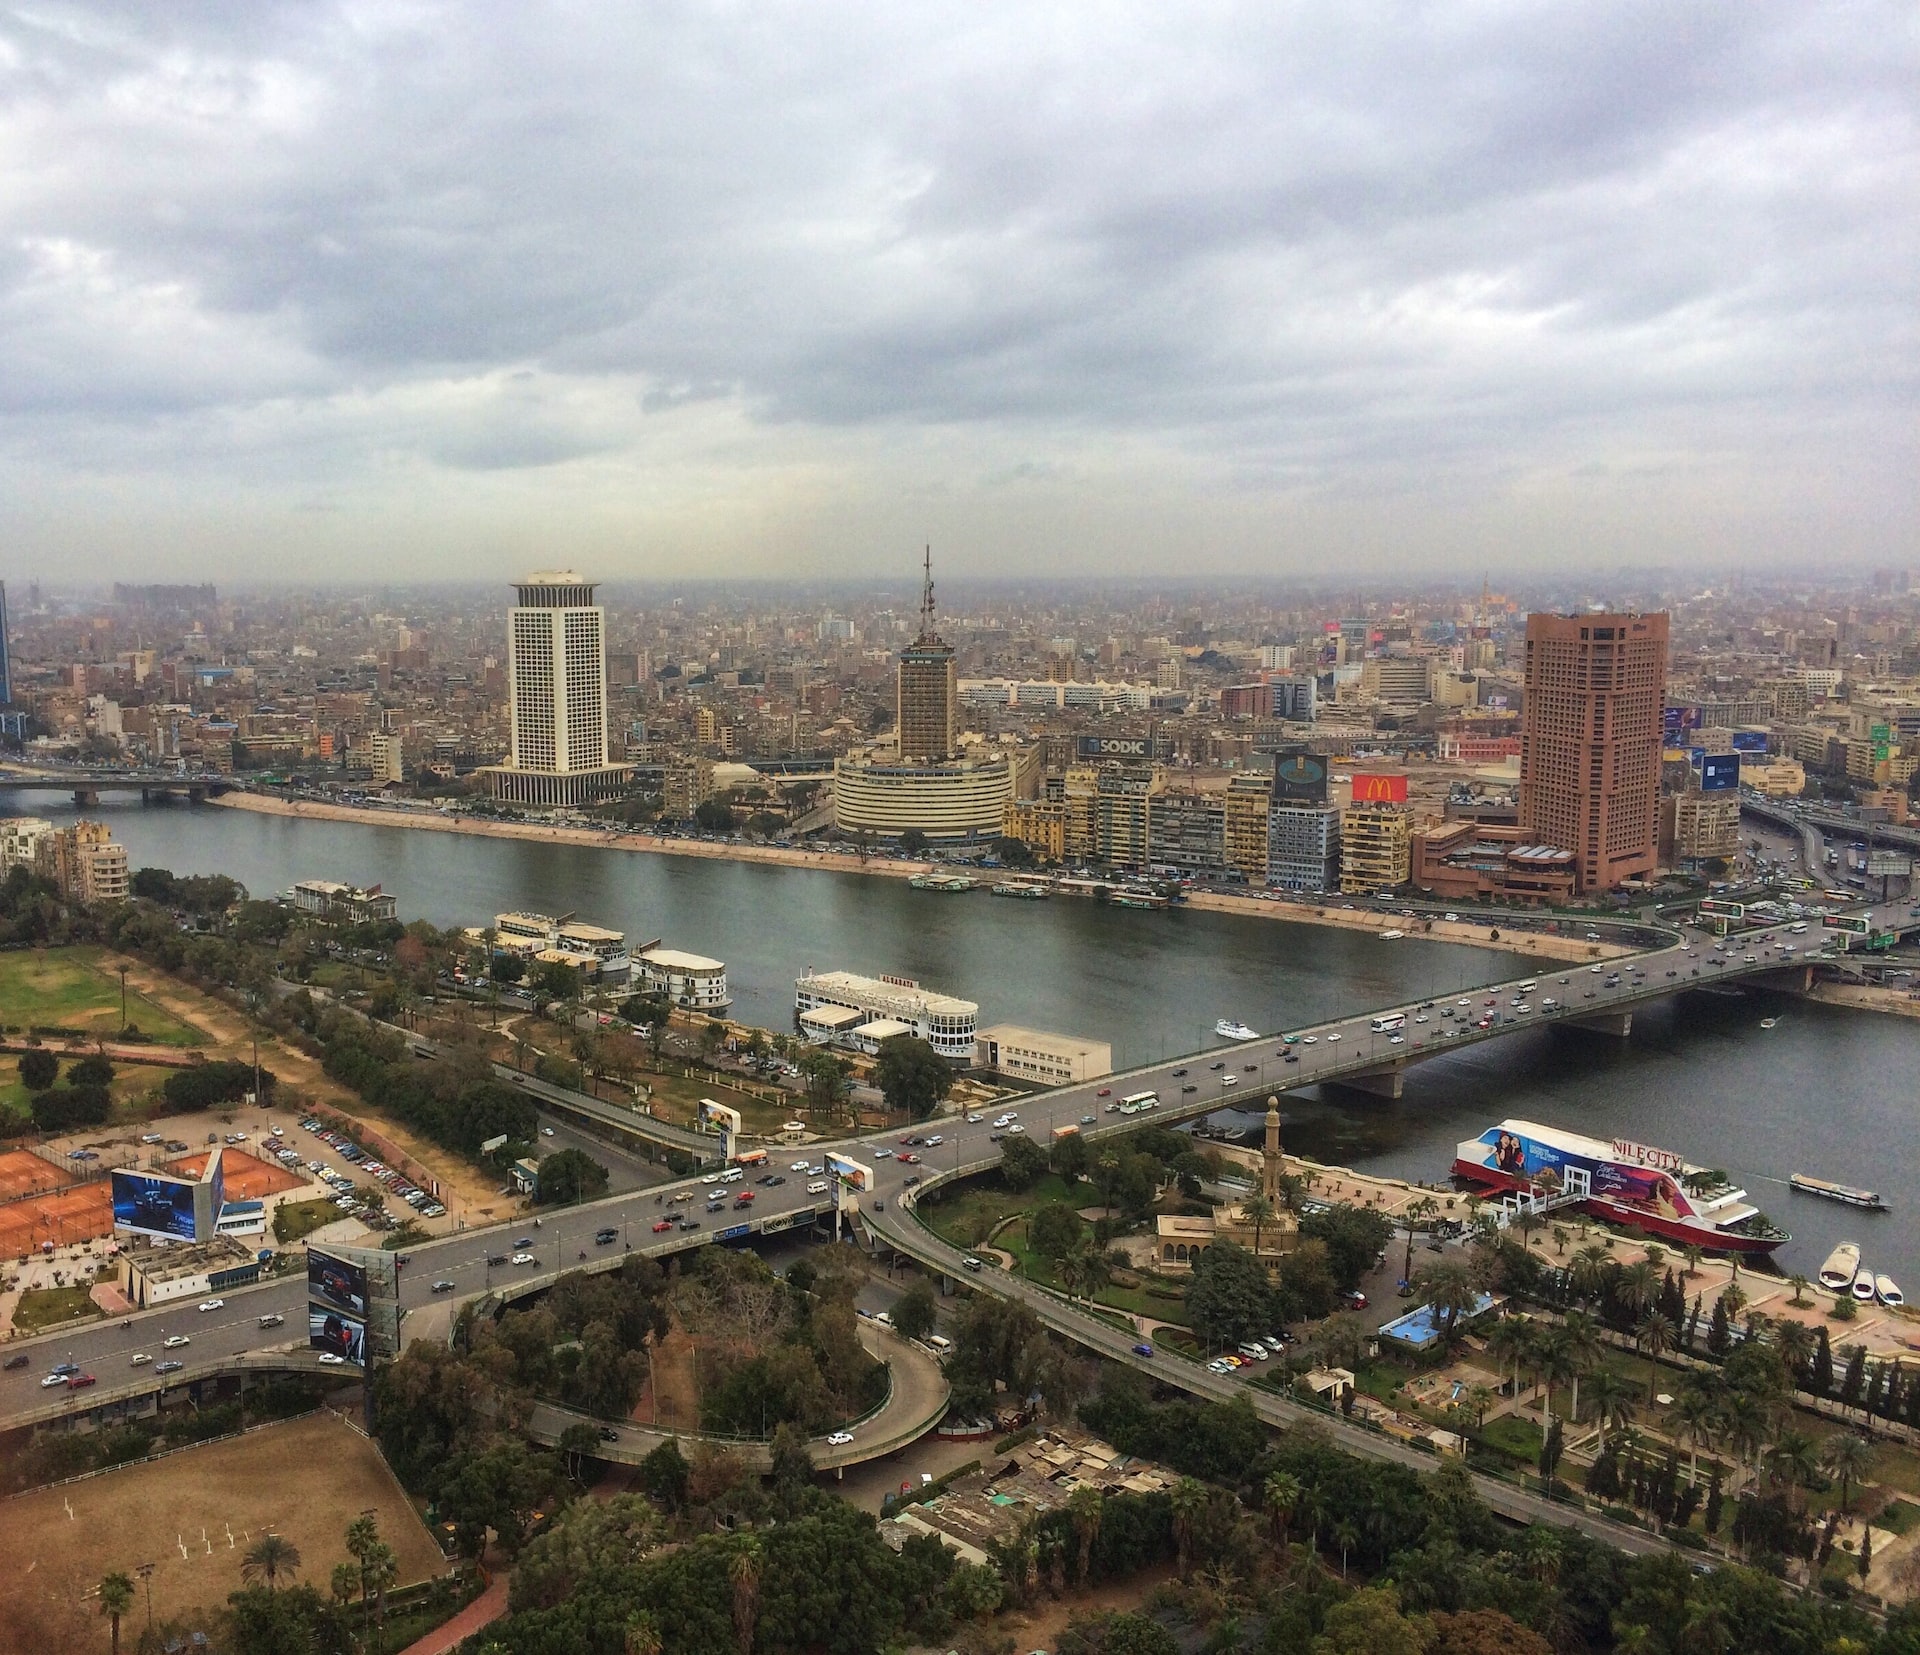 Day 1: Arrival in Cairo